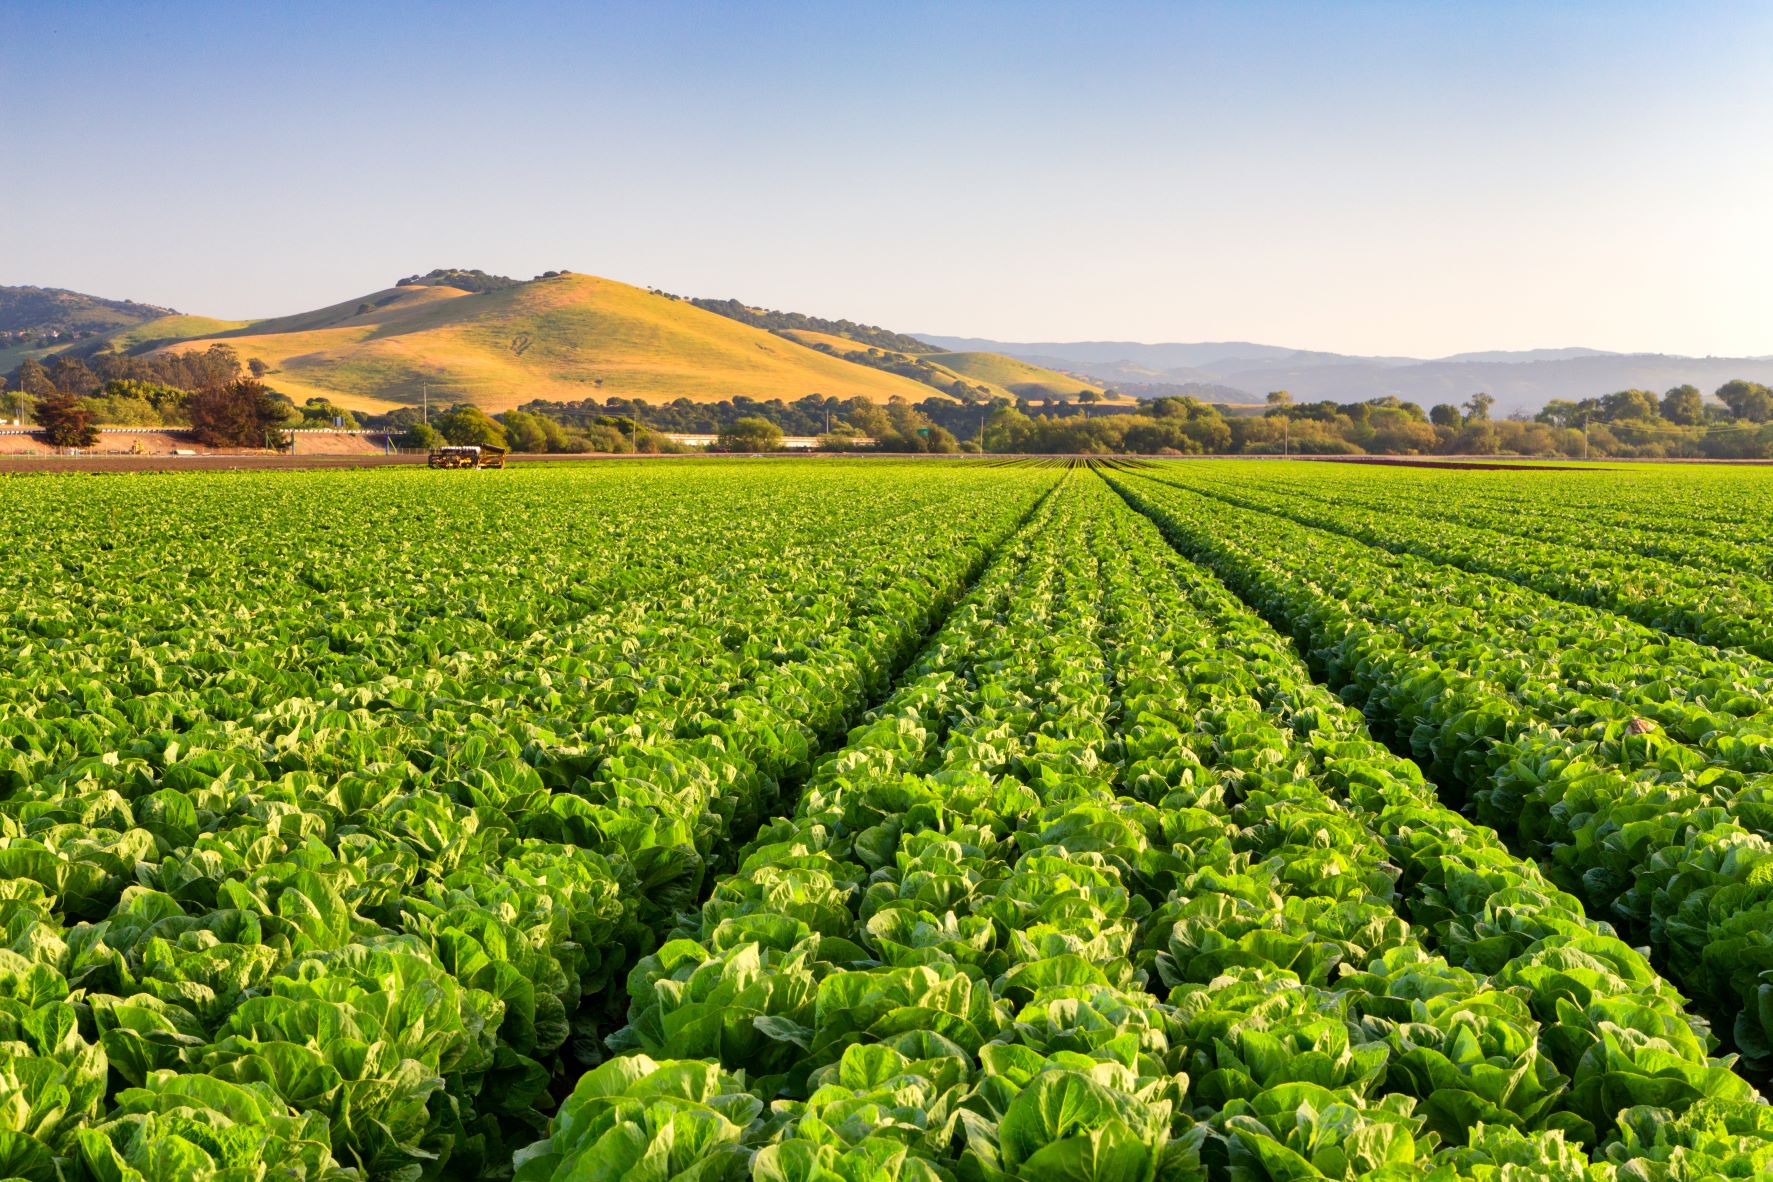 Agtech creating a smarter, cost-effective, sustainable agriculture sector